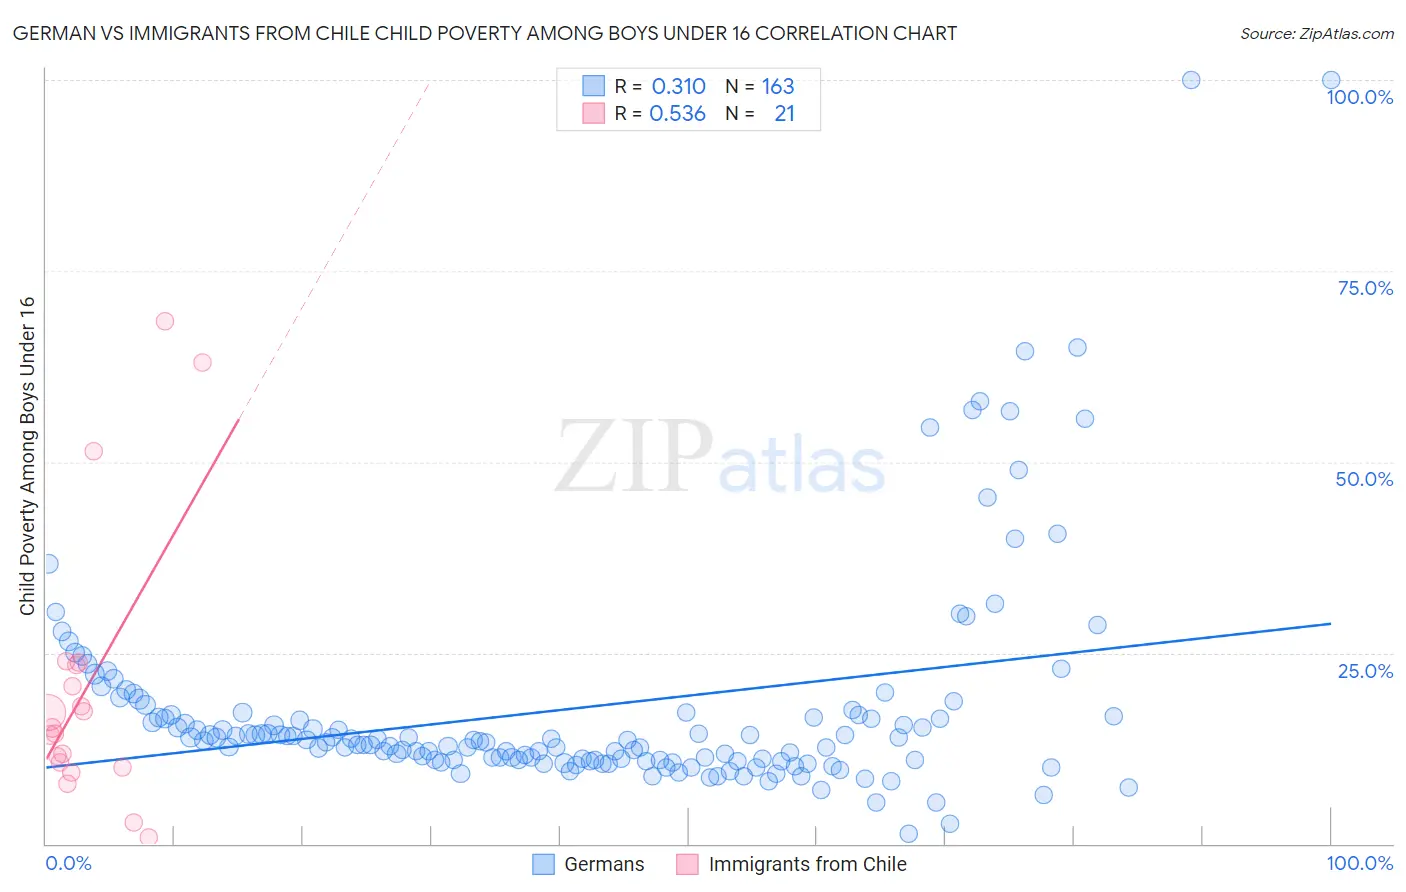 German vs Immigrants from Chile Child Poverty Among Boys Under 16